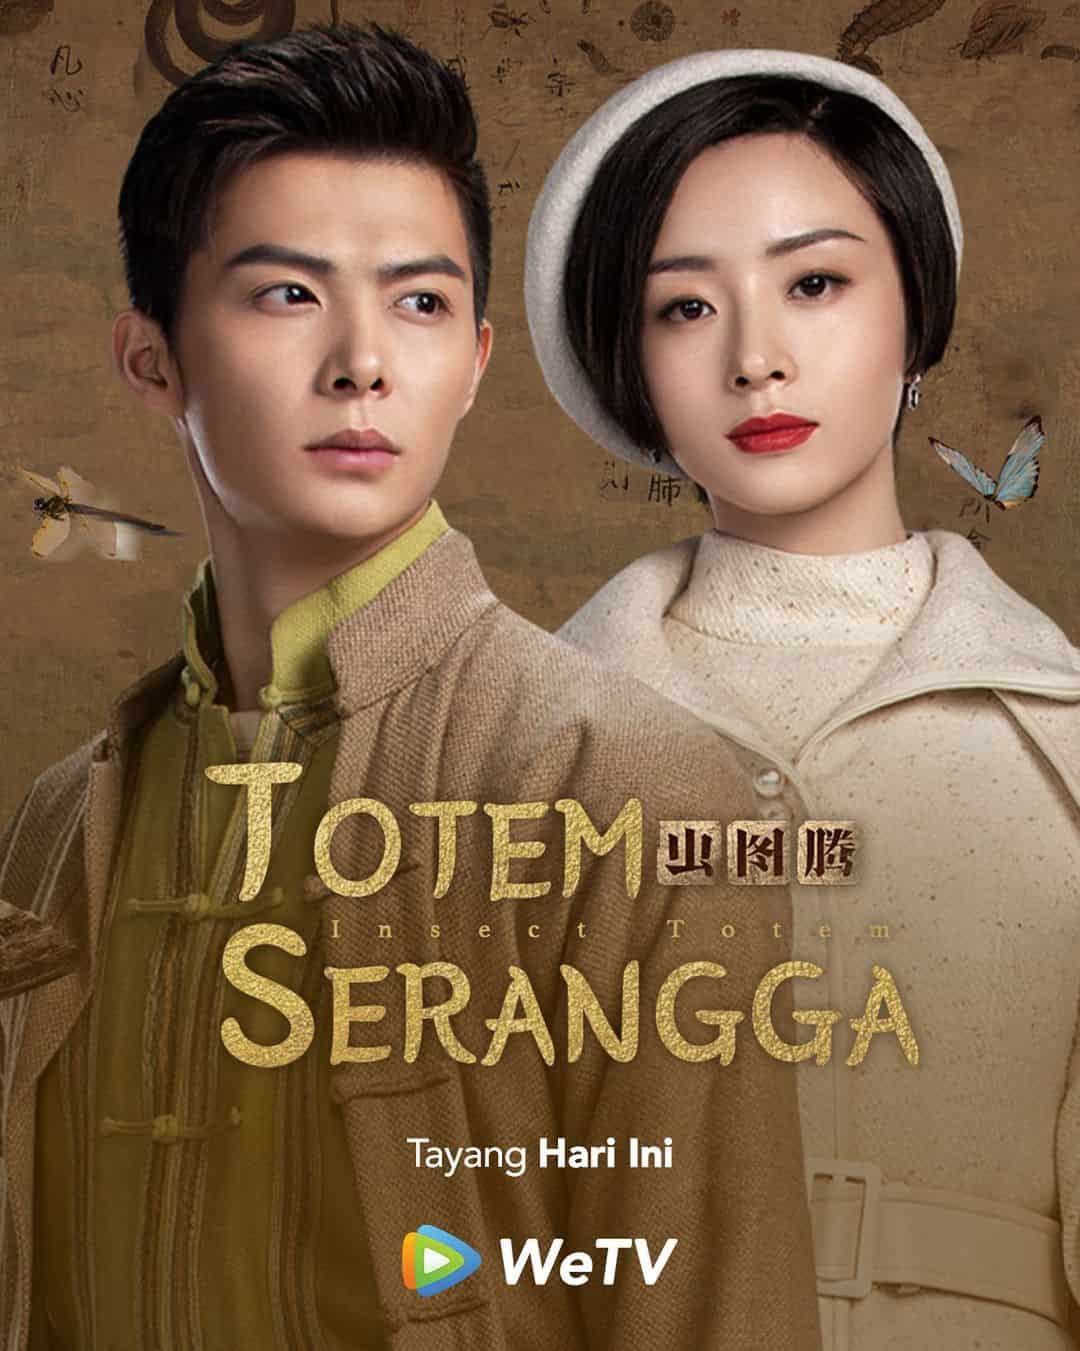 Insect Totem - Sinopsis, Pemain, OST, Episode, Review